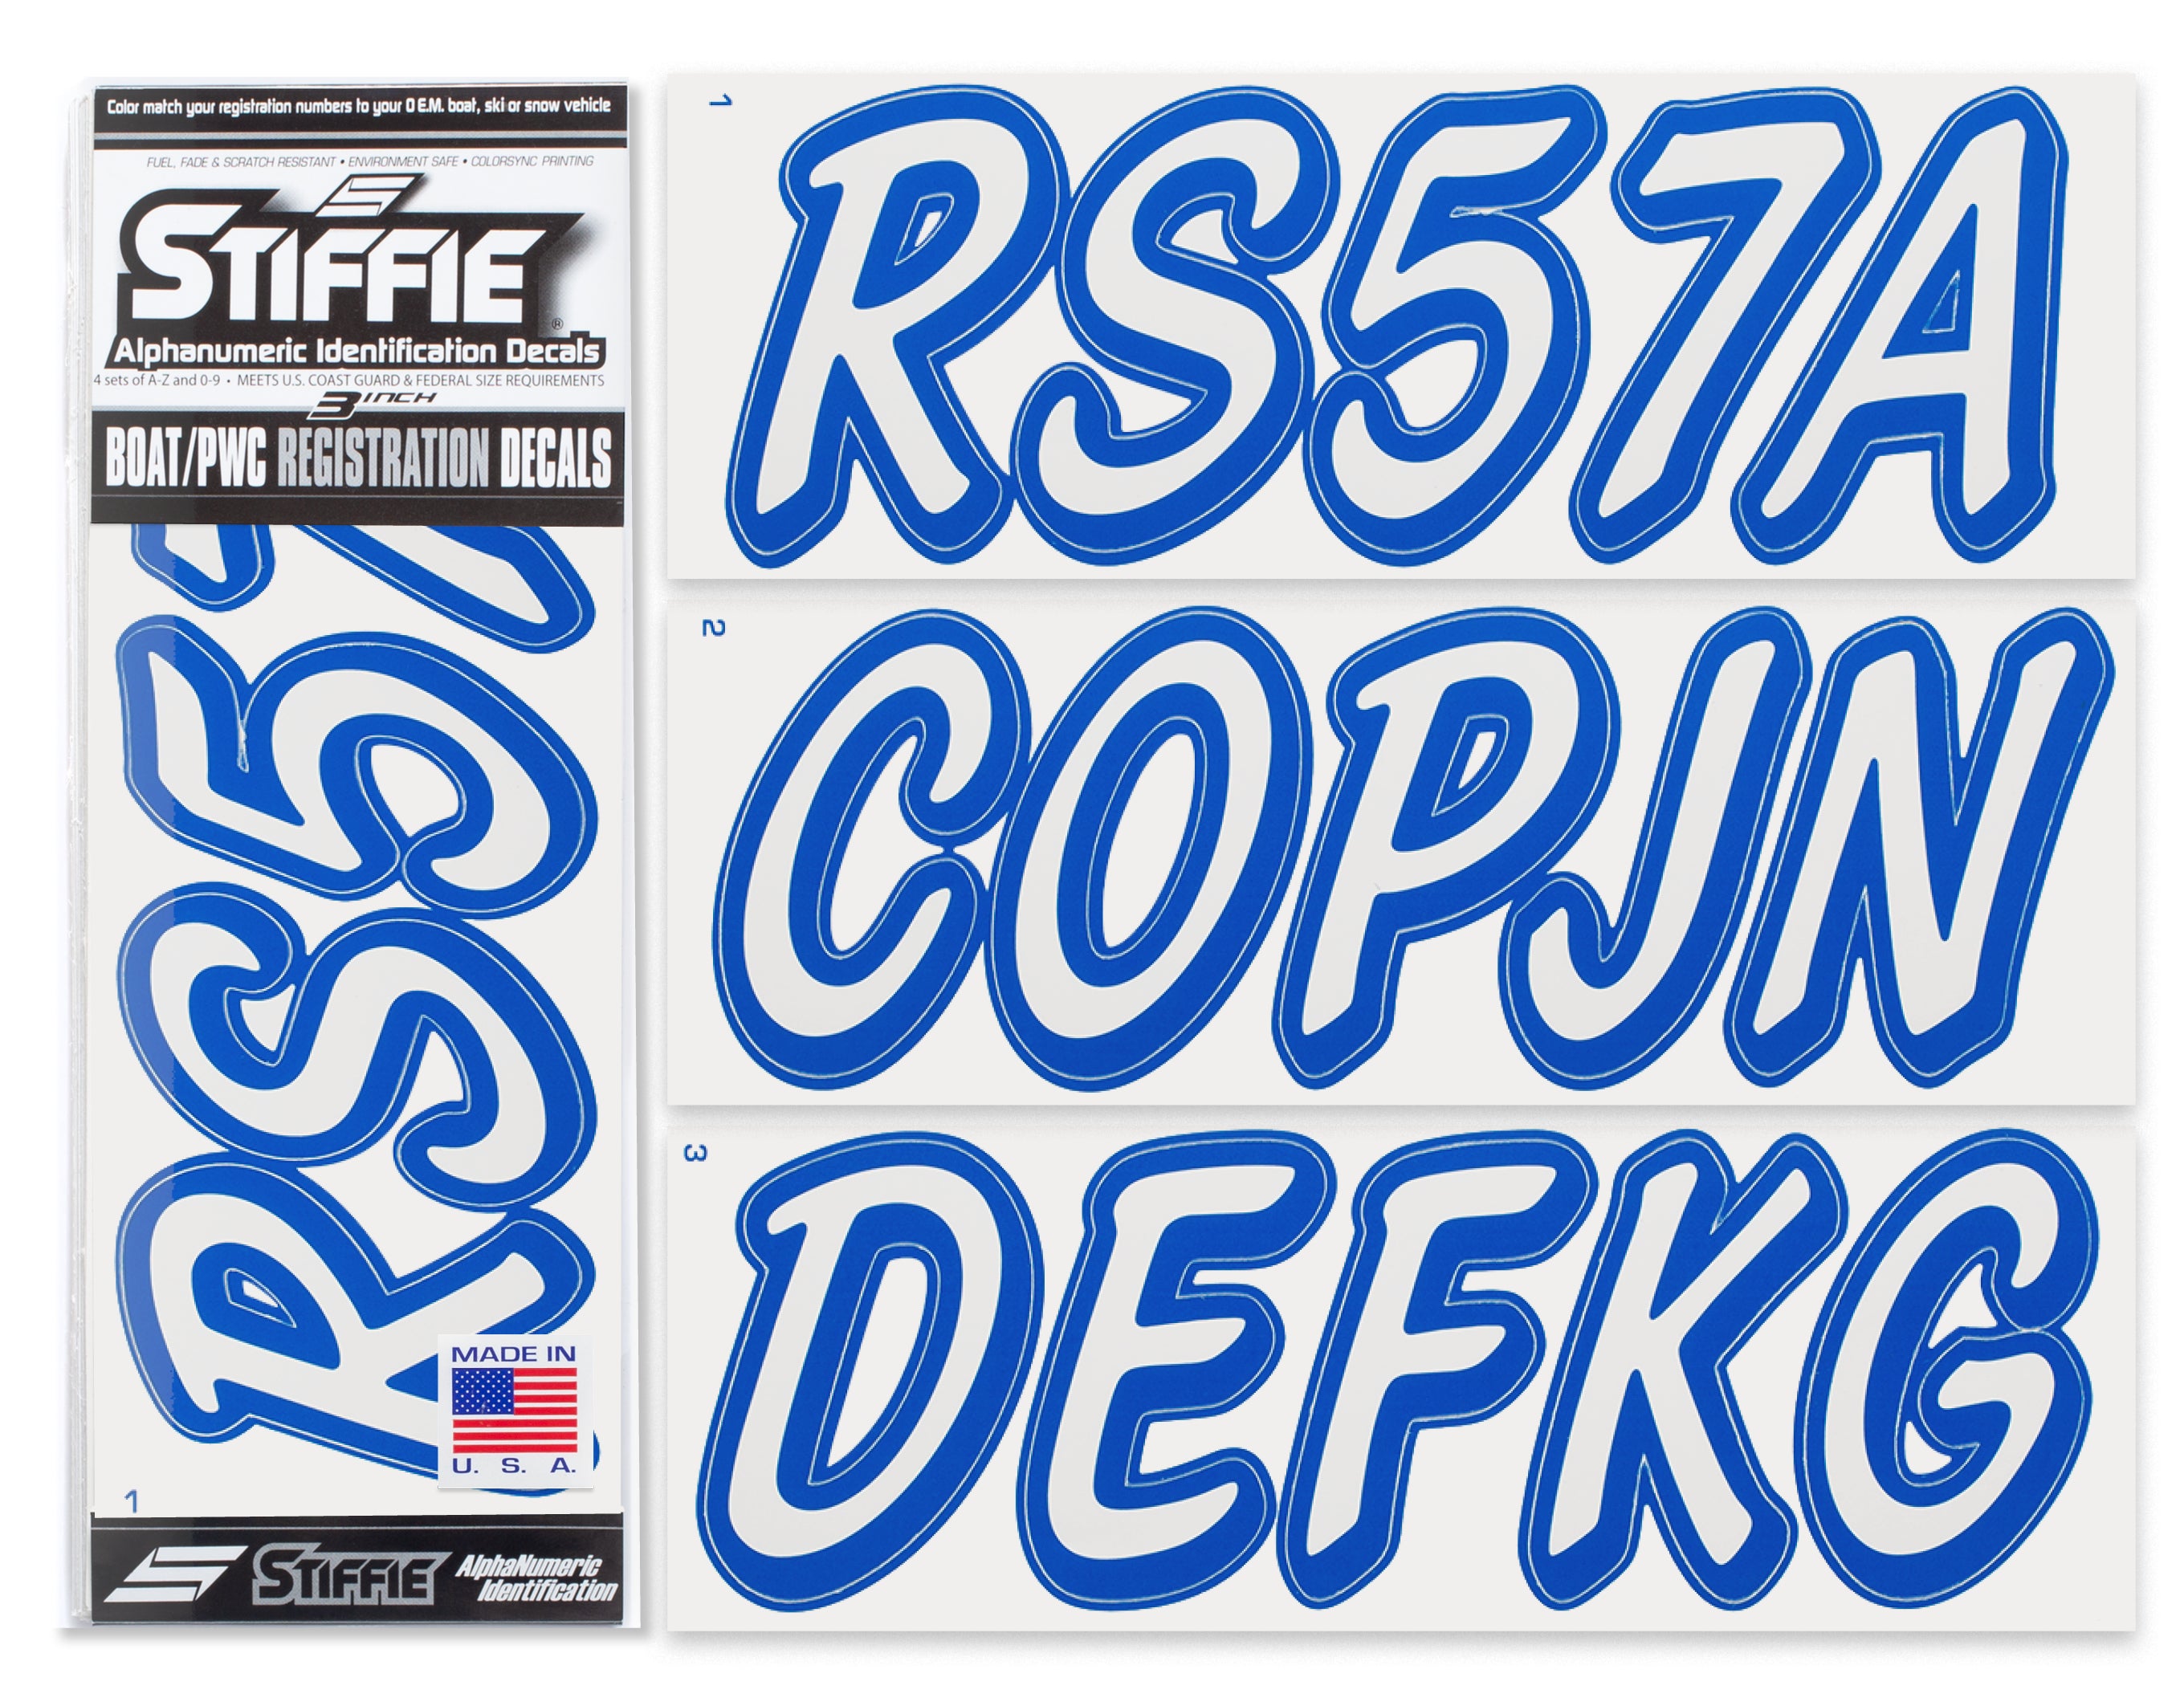 STIFFIE Whipline Solid White/Blue 3" Alpha-Numeric Registration Identification Numbers Stickers Decals for Boats & Personal Watercraft